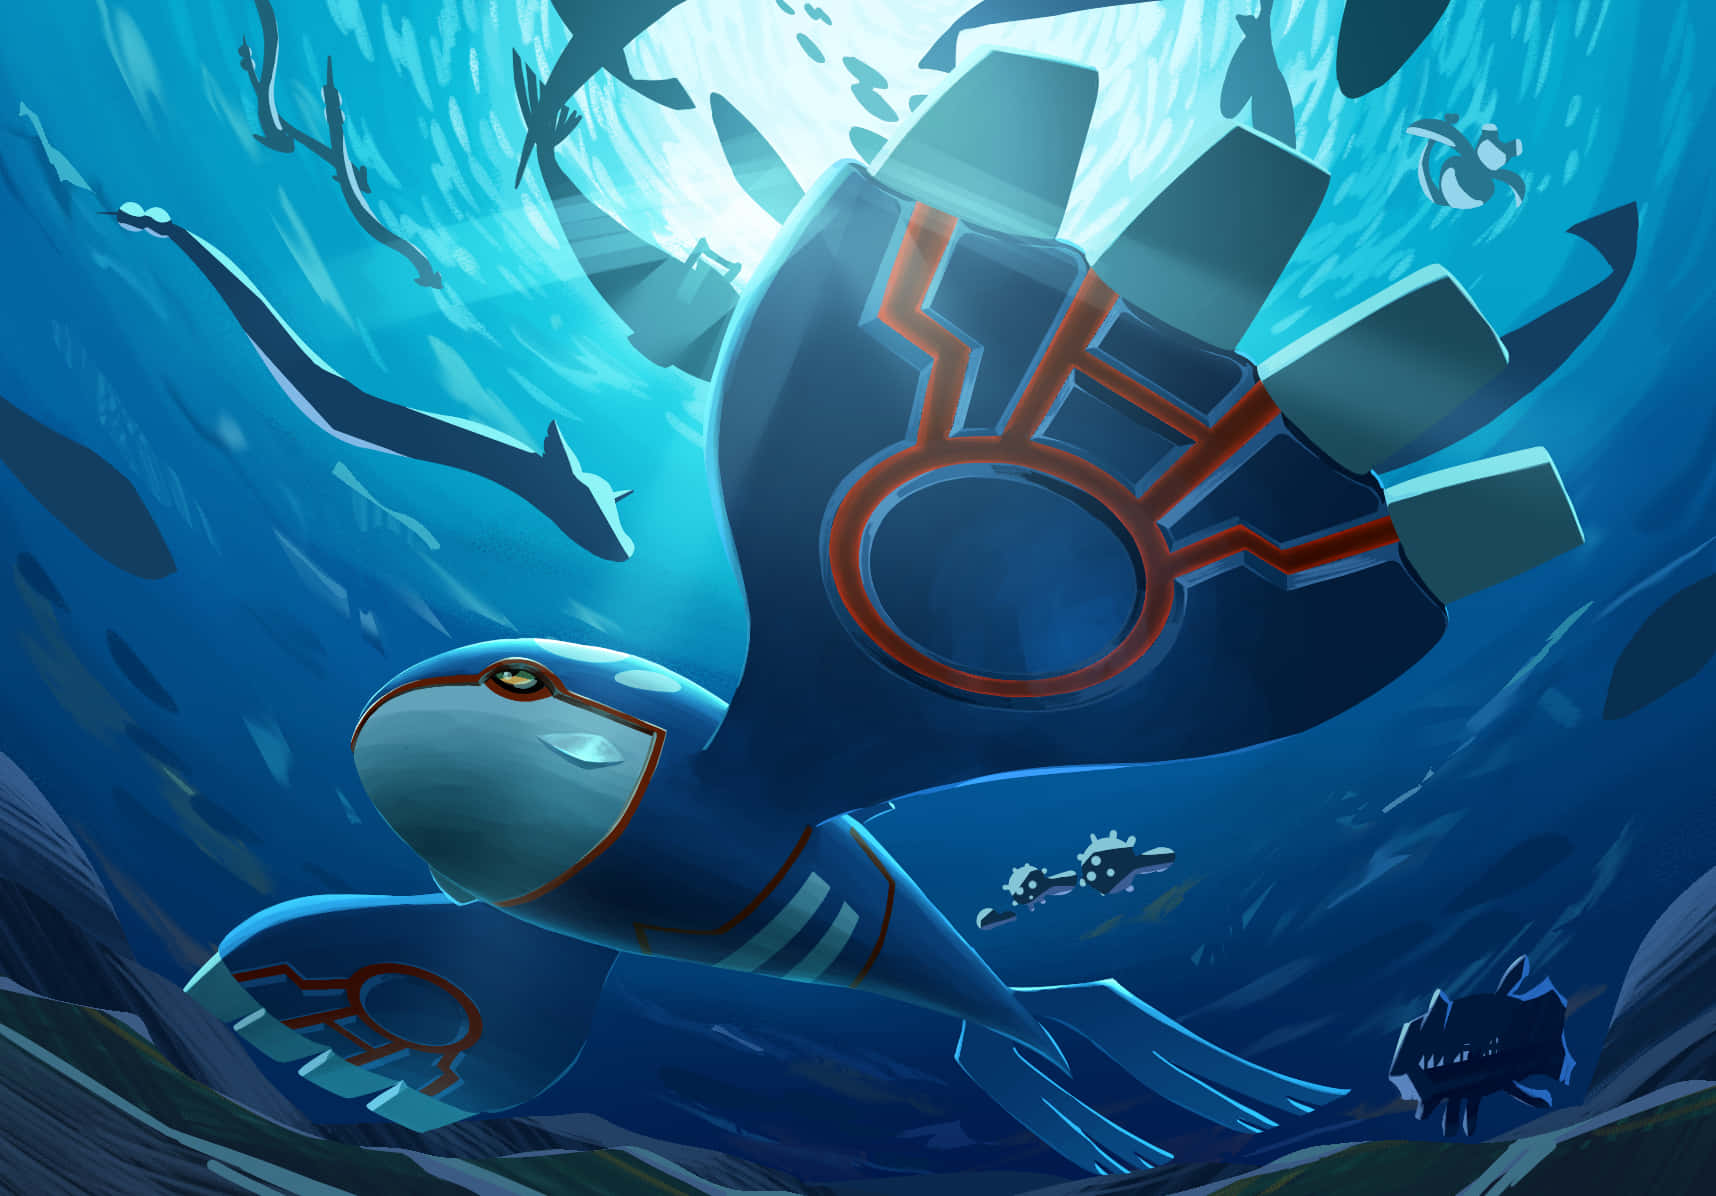 Download Kyogre Pokémon wallpapers for mobile phone free Kyogre  Pokémon HD pictures